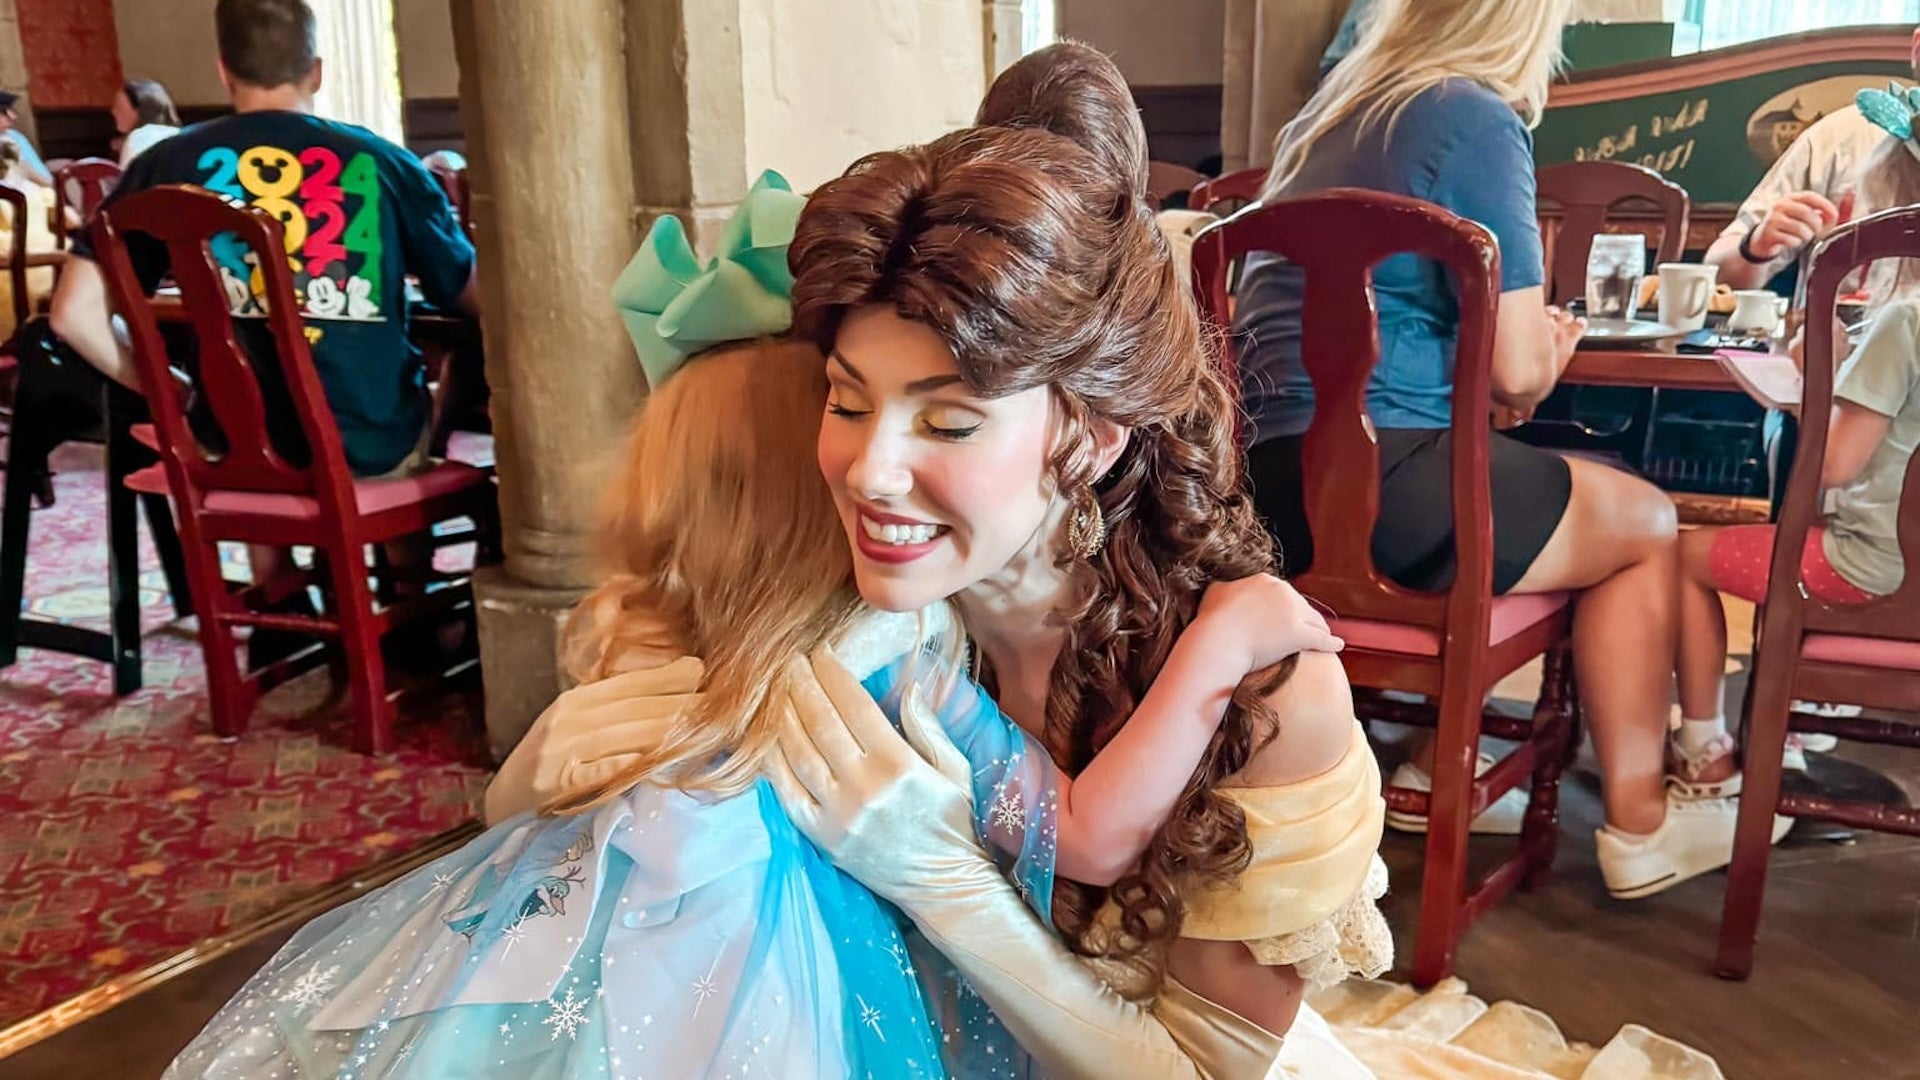 Belle princess from Akershus Royal Banquet Hall with a kid dressed up as a princess